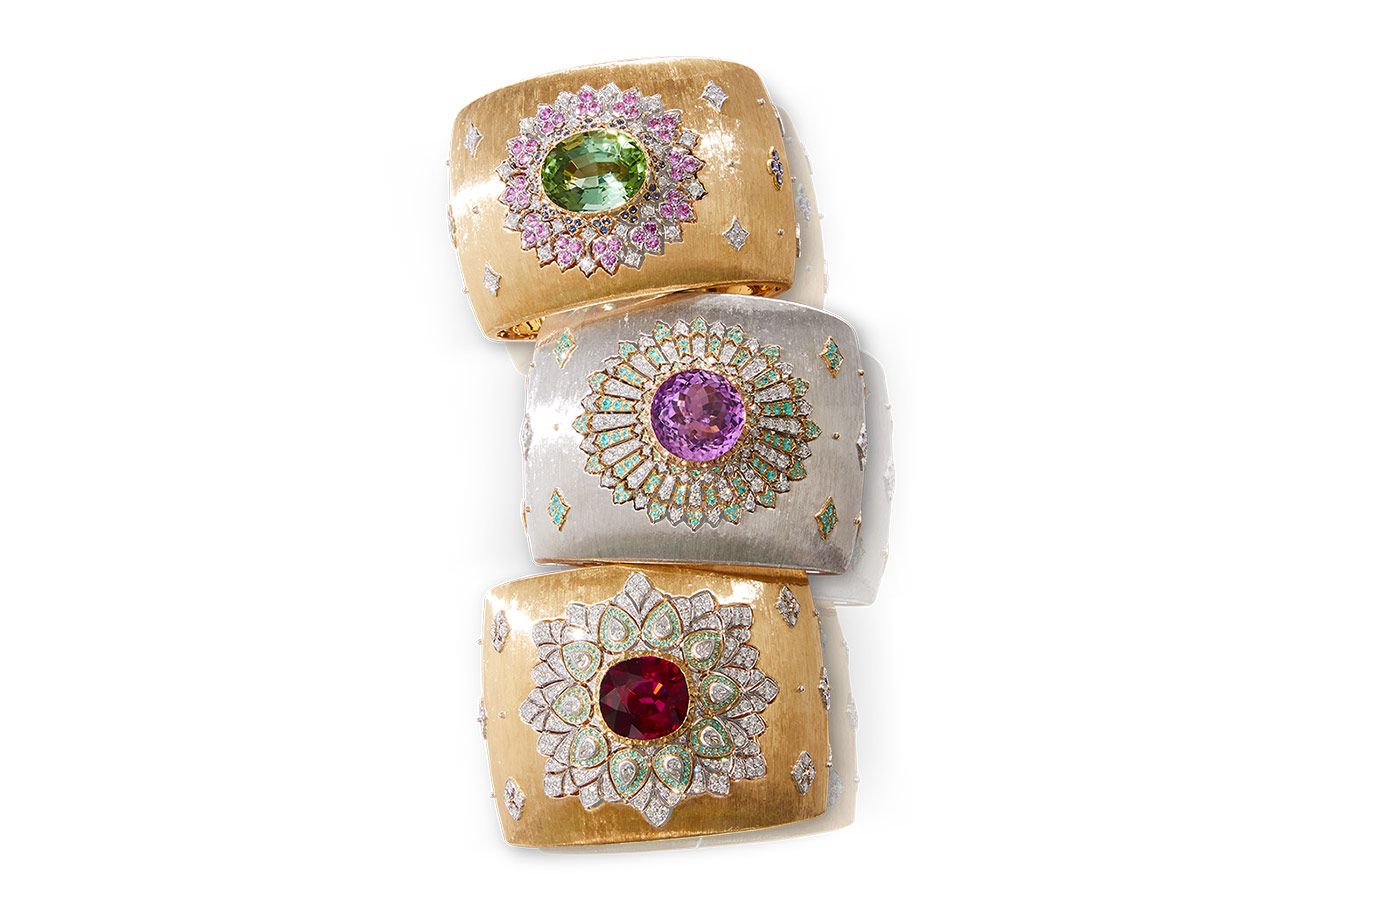 Cuff bracelets from the Il Giardino di Buccellati High Jewellery collection, including (from top to bottom) the Lilium cuff, the Aubreta cuff and the Dans du Feu cuff set with a large faceted tourmaline, kunzite and rubellite, respectively